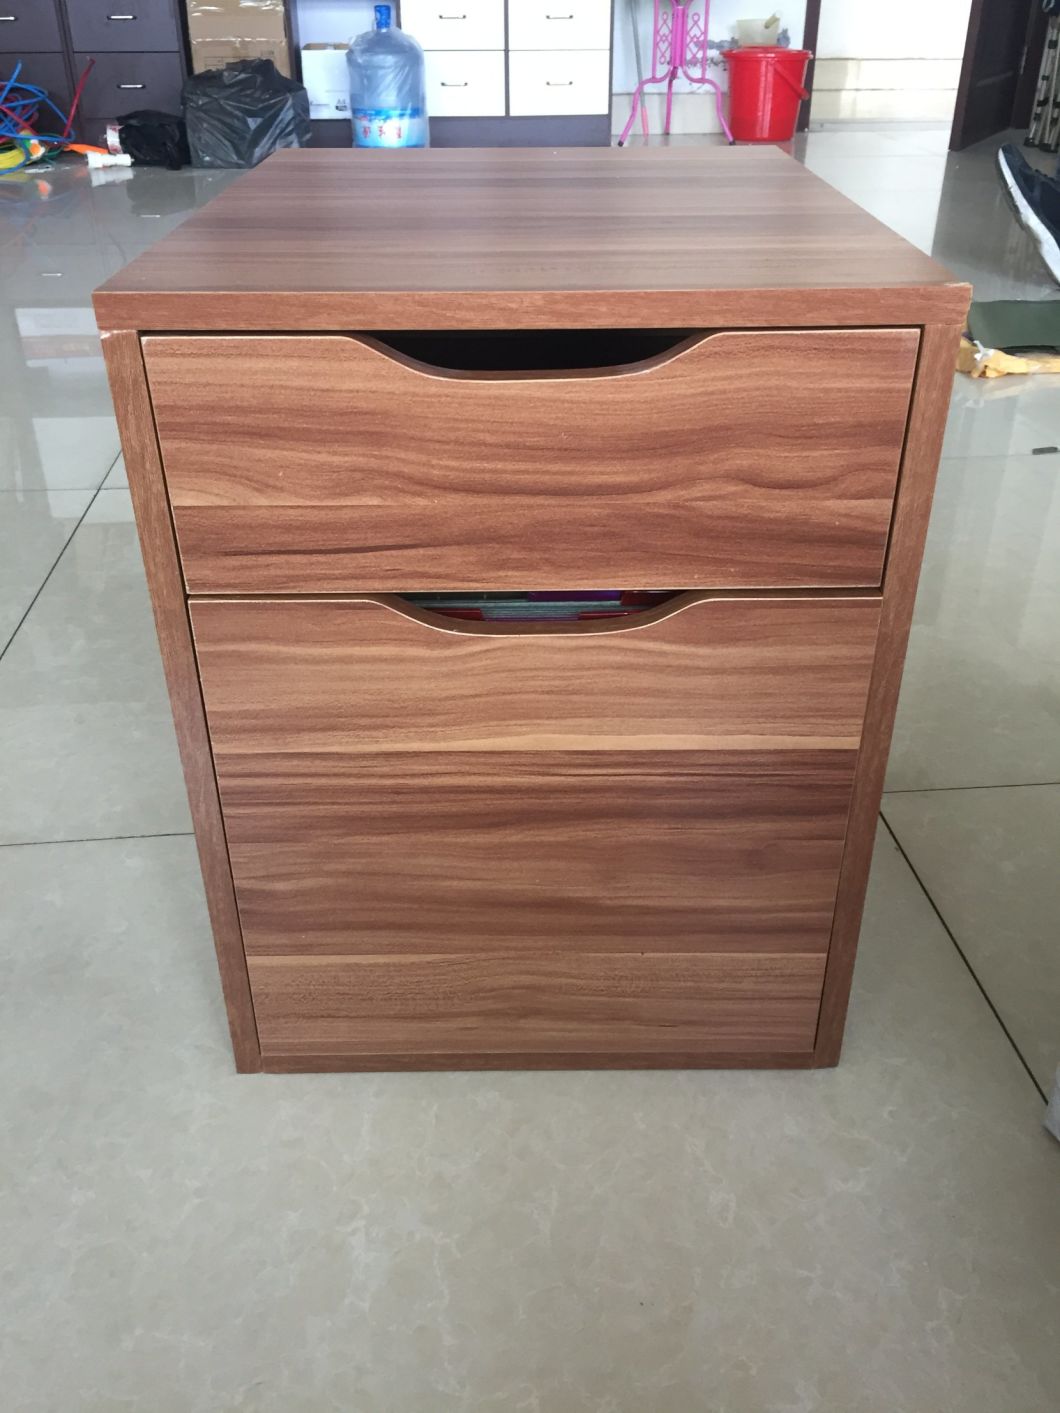 File Cabinet with 2 Drawers